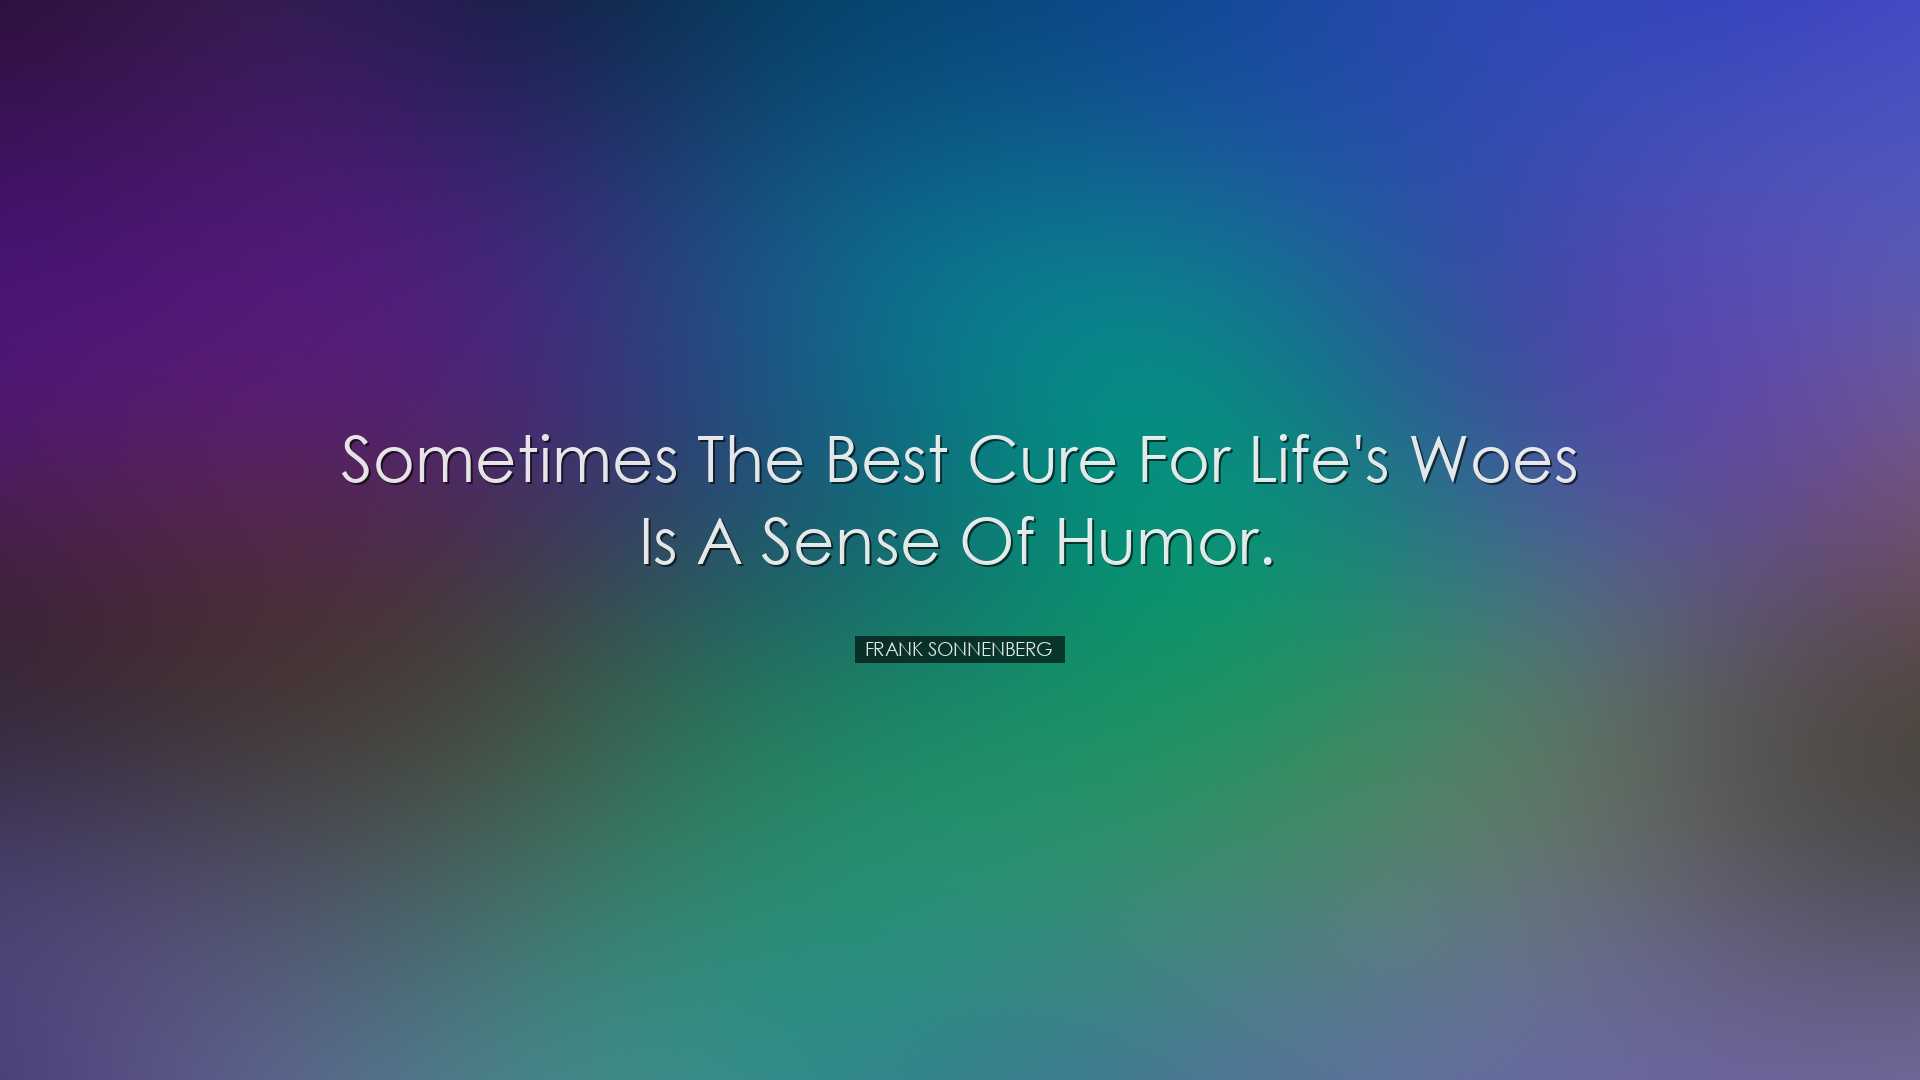 Sometimes the best cure for life's woes is a sense of humor. - Fra